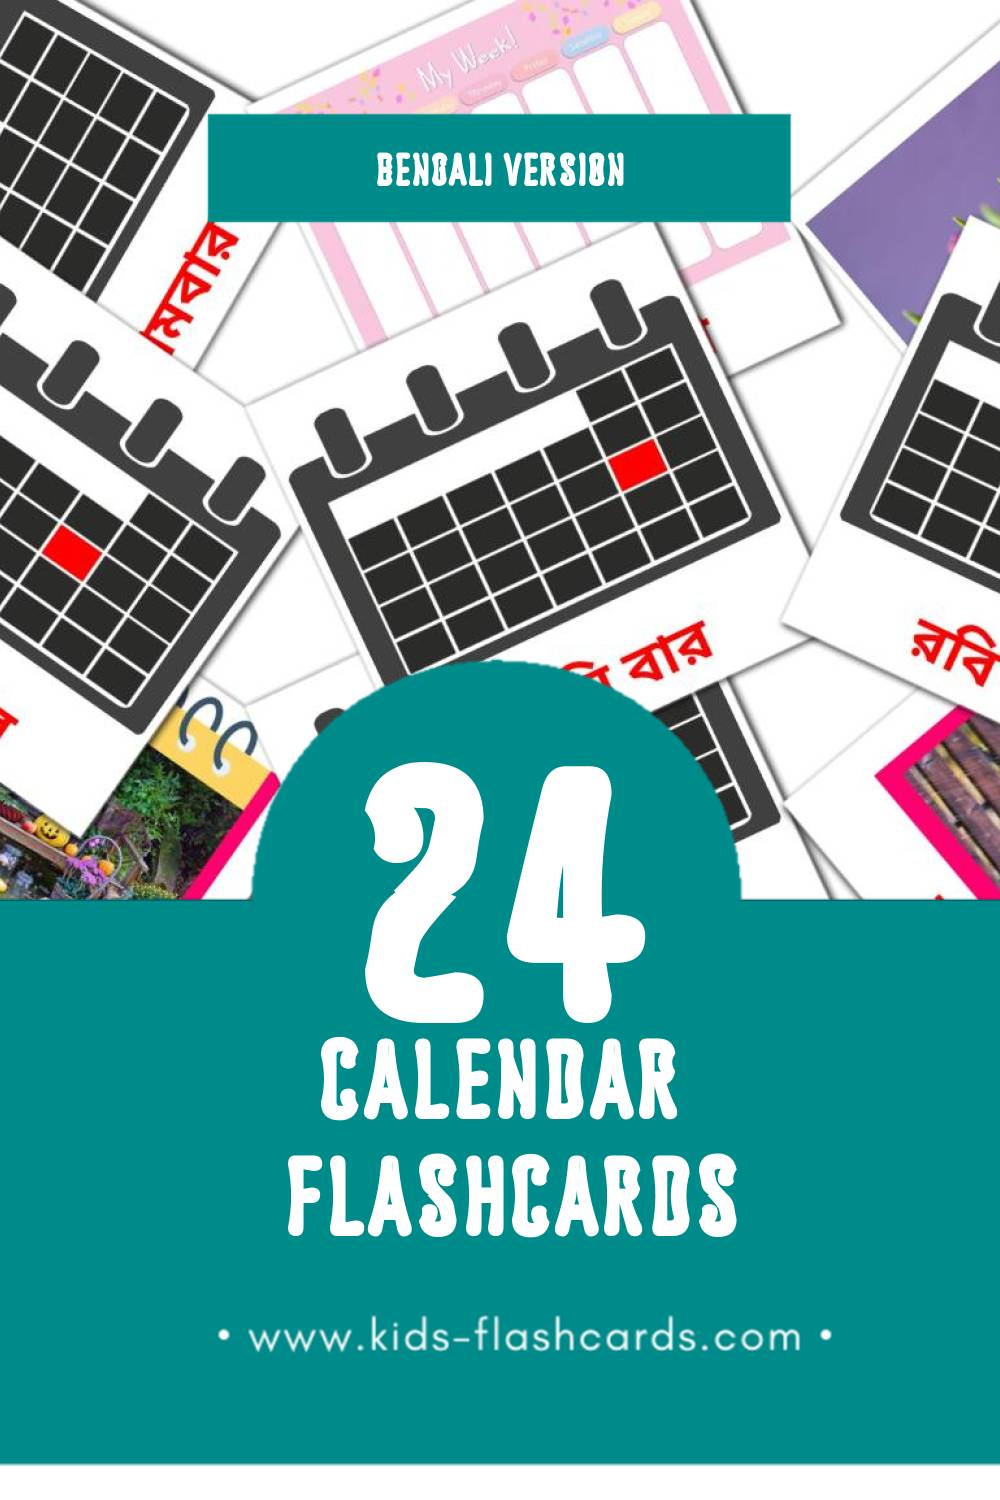 Visual পঞ্জিকা Flashcards for Toddlers (24 cards in Bengali)